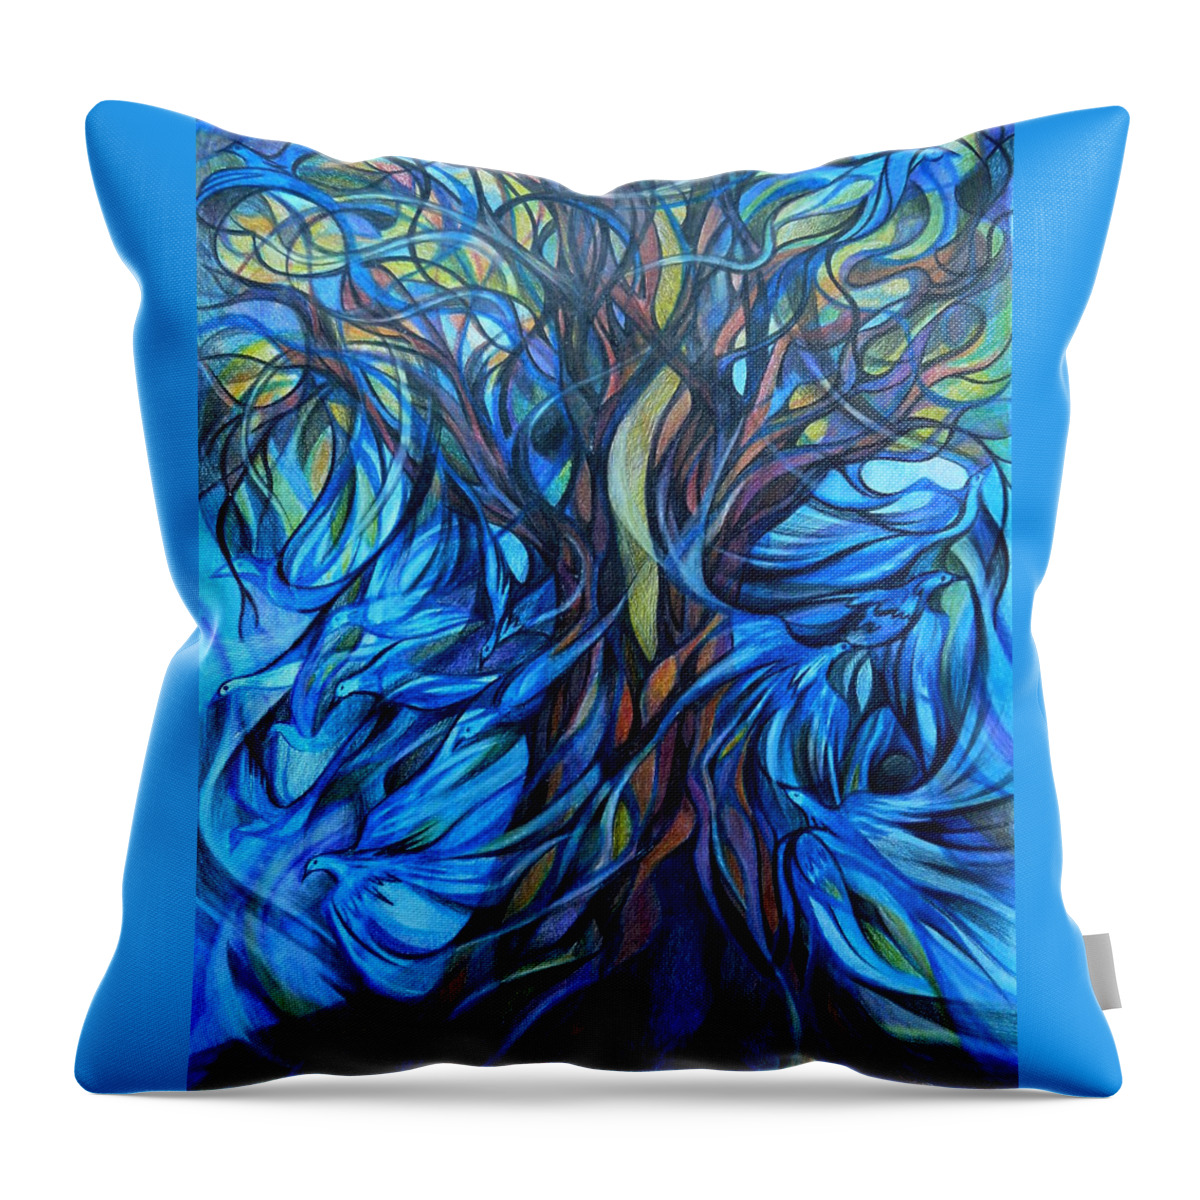 Travel Impressions Throw Pillow featuring the drawing Wind From The Past by Anna Duyunova